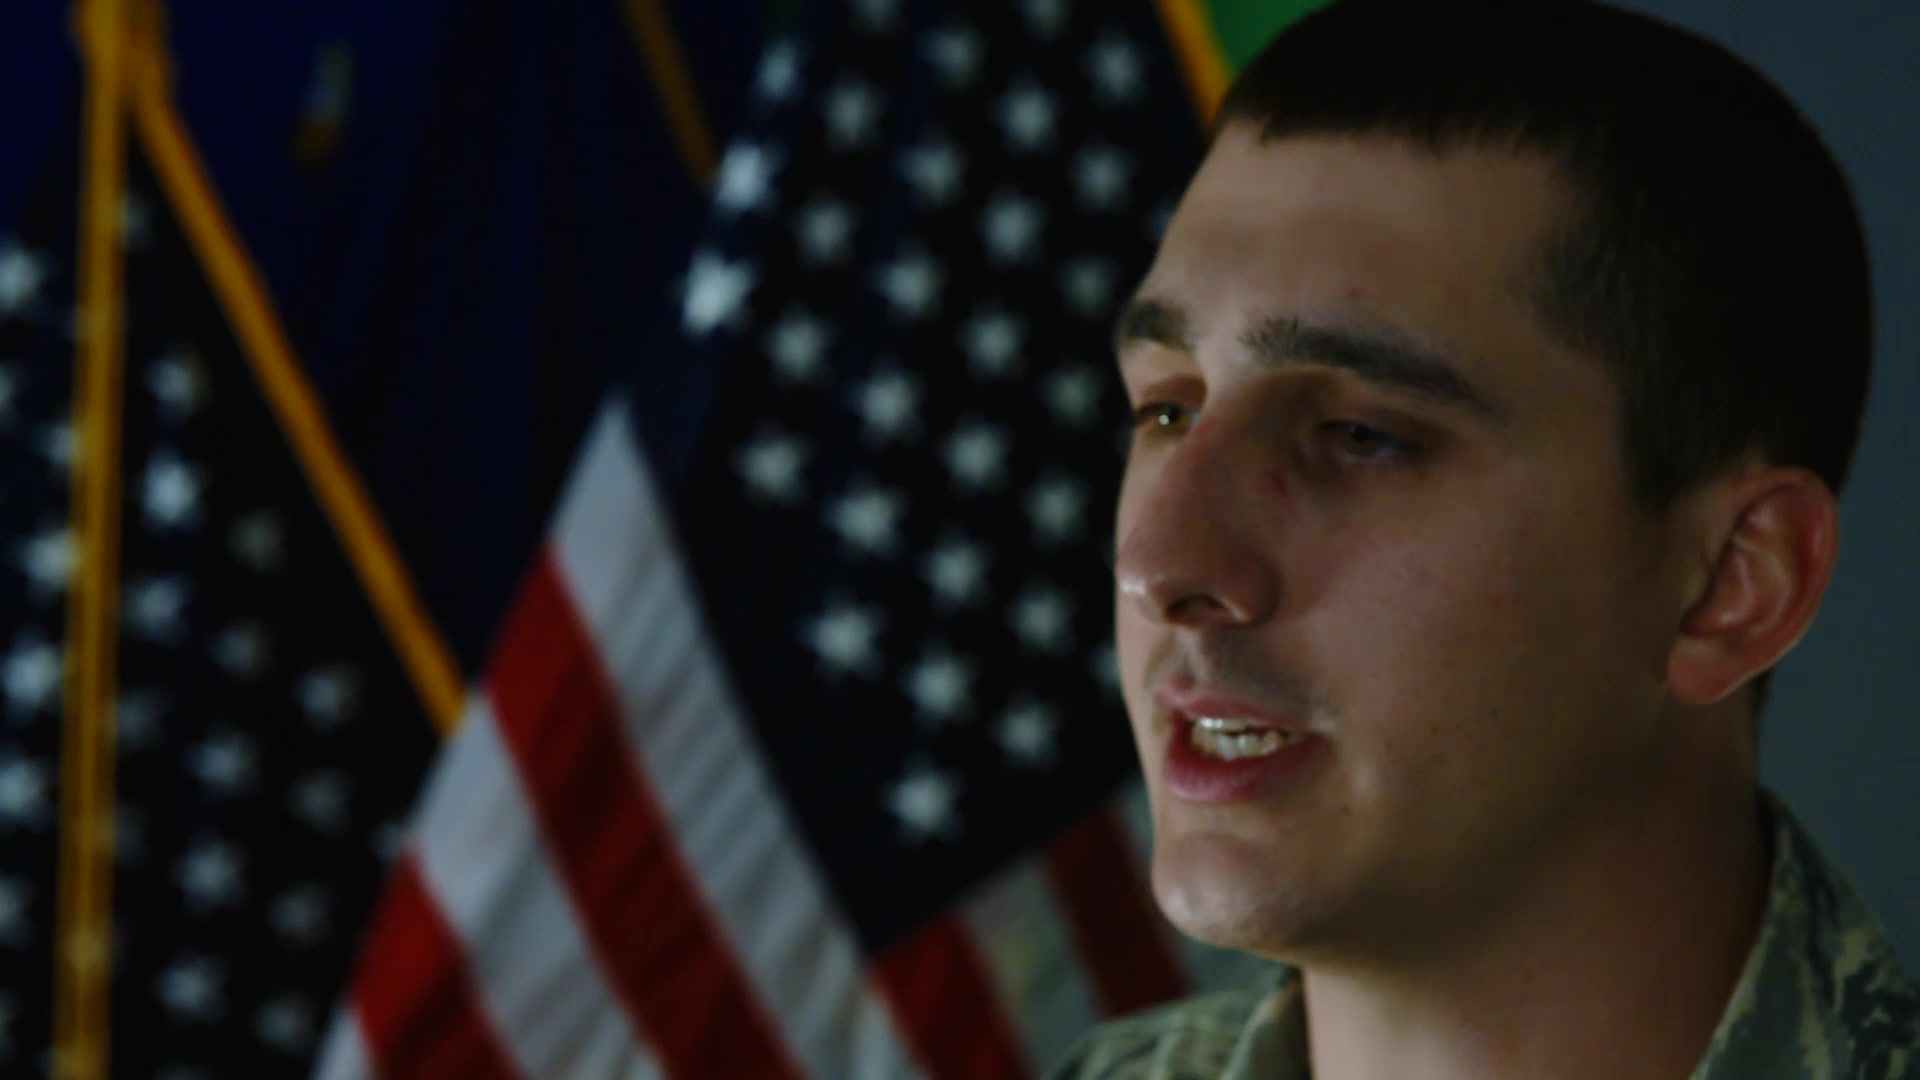 Staff Sgt. Jordan Kinney, 914th Air Refueling Wing, Niagara Falls Air Reserve Station, N.Y., shares his story of overcoming personal challenges in his life and emerging stronger and more resilient. (U.S. Air Force video by Tech. Sgt. Thomas Grimes)